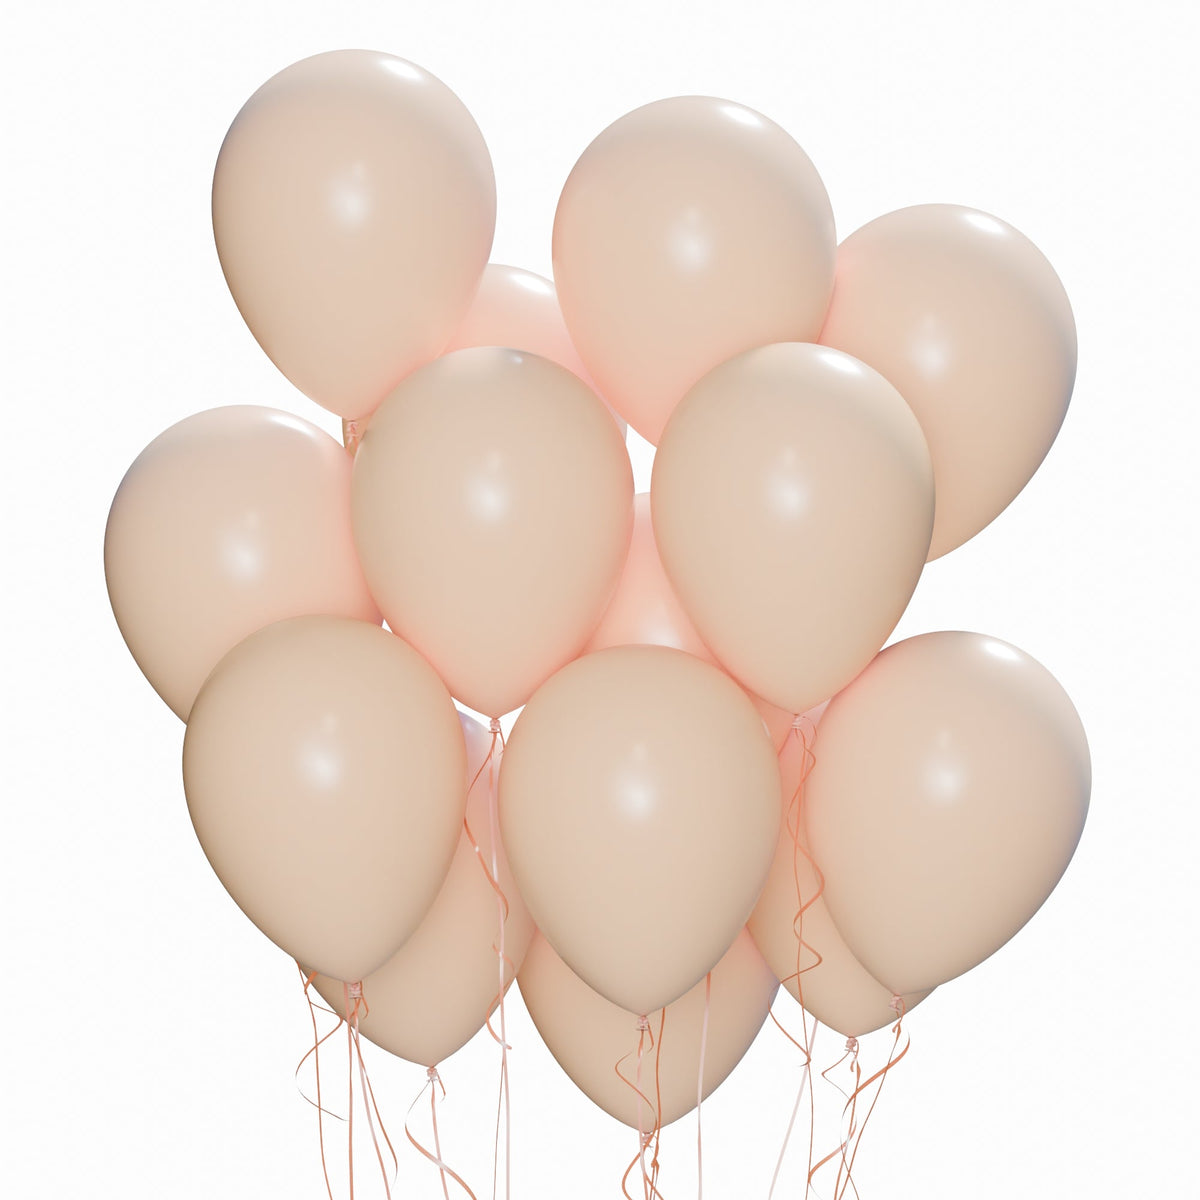 WIDE OCEAN INTERNATIONAL TRADE BEIJING CO., LTD Balloons Blush Nude Latex Balloon 12 Inches, 72 Count 810077656334